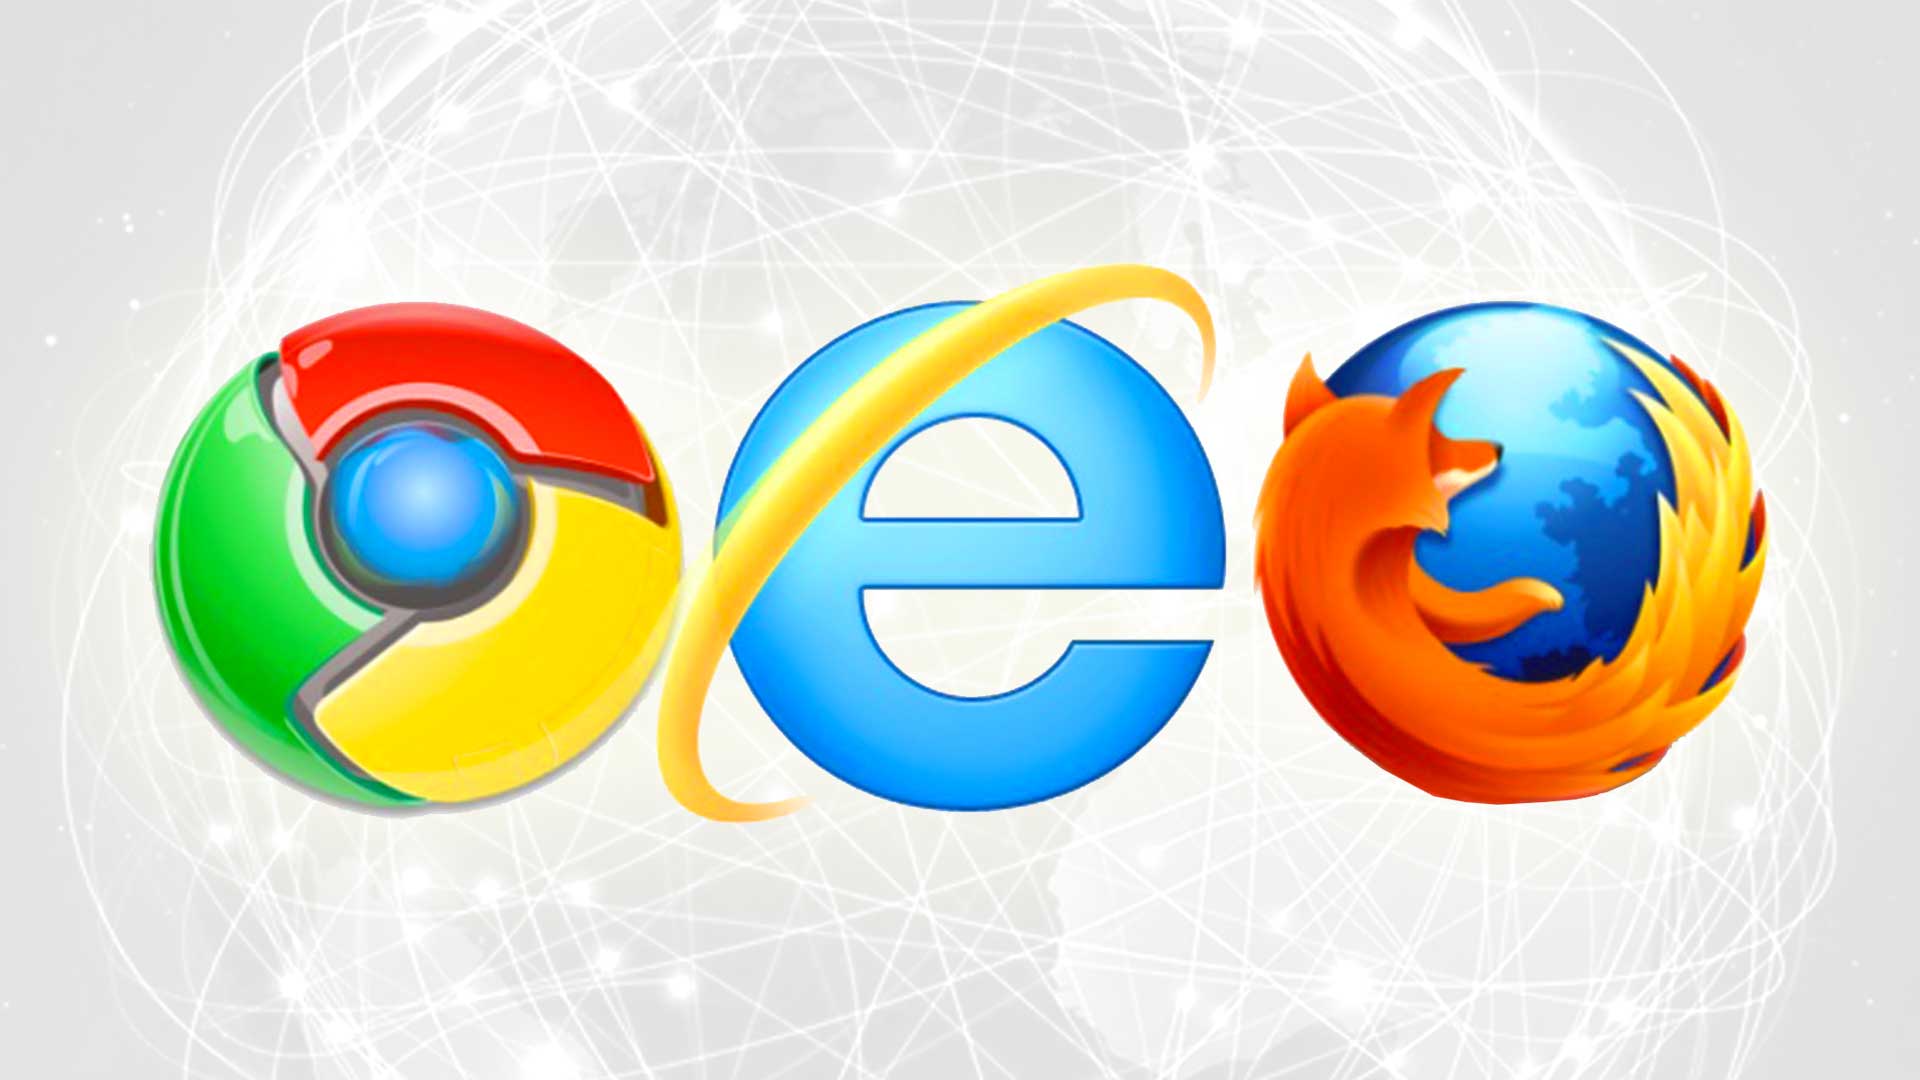 Google Launches New Web Browser Called Chrome